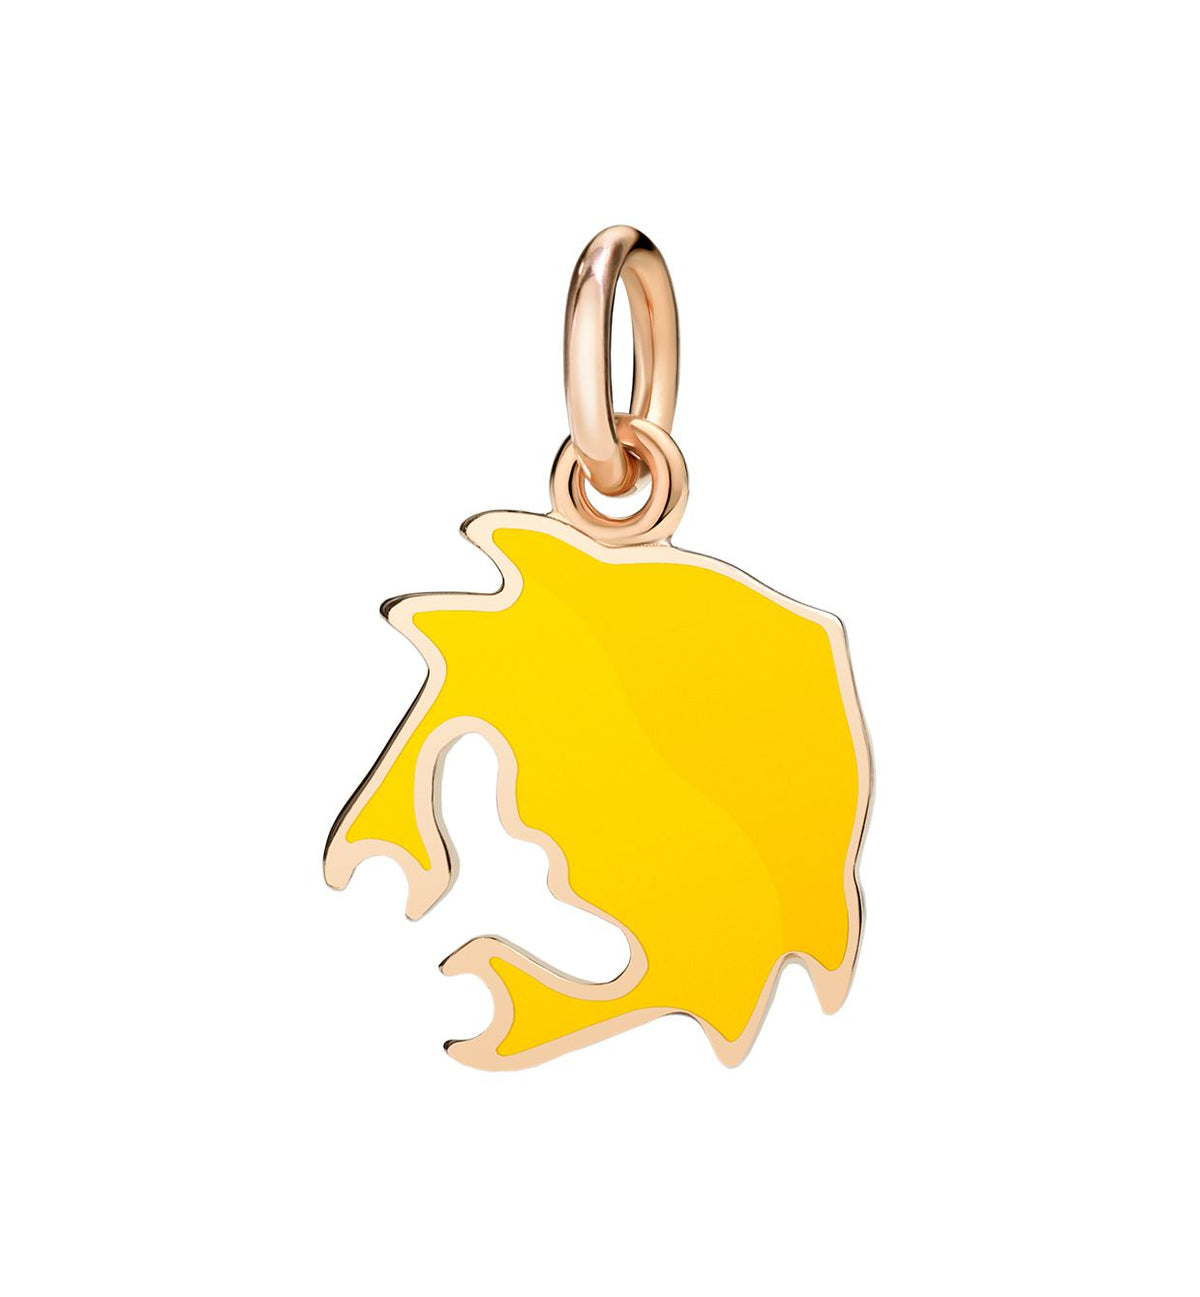 DoDo Crab in 9k Rose Gold and Yellow Enamel - Orsini Jewellers NZ